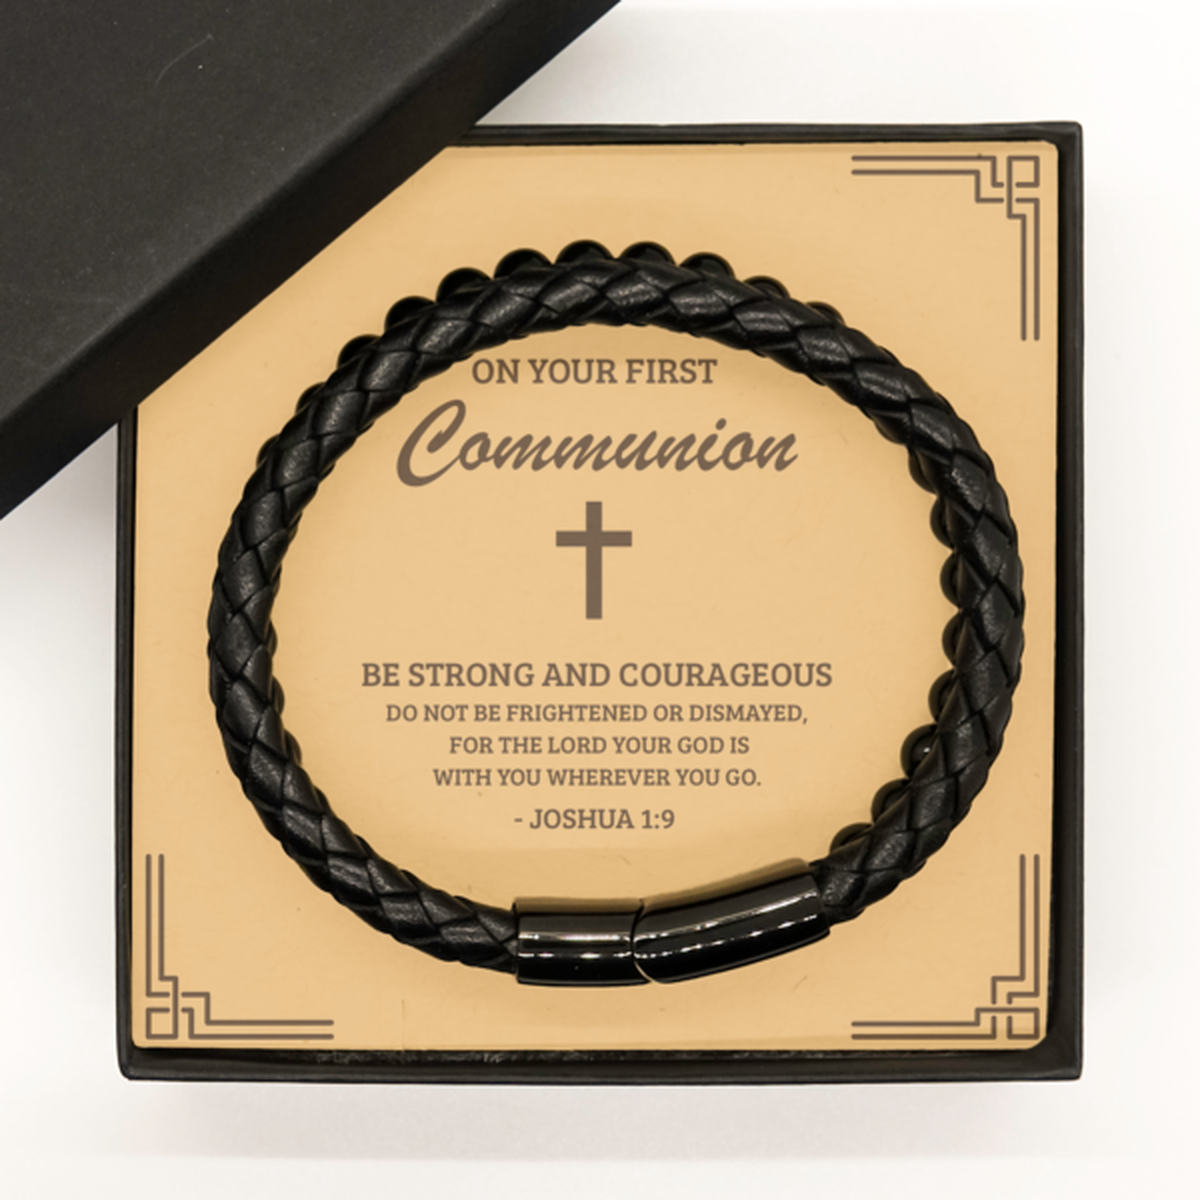 First Communion Gifts for Teenage Boys, Be strong and courageous, Stone Leather Bracelet with Bible Verse Message Card, Religious Catholic Bracelet for Son, Grandson, Dad, Godfather